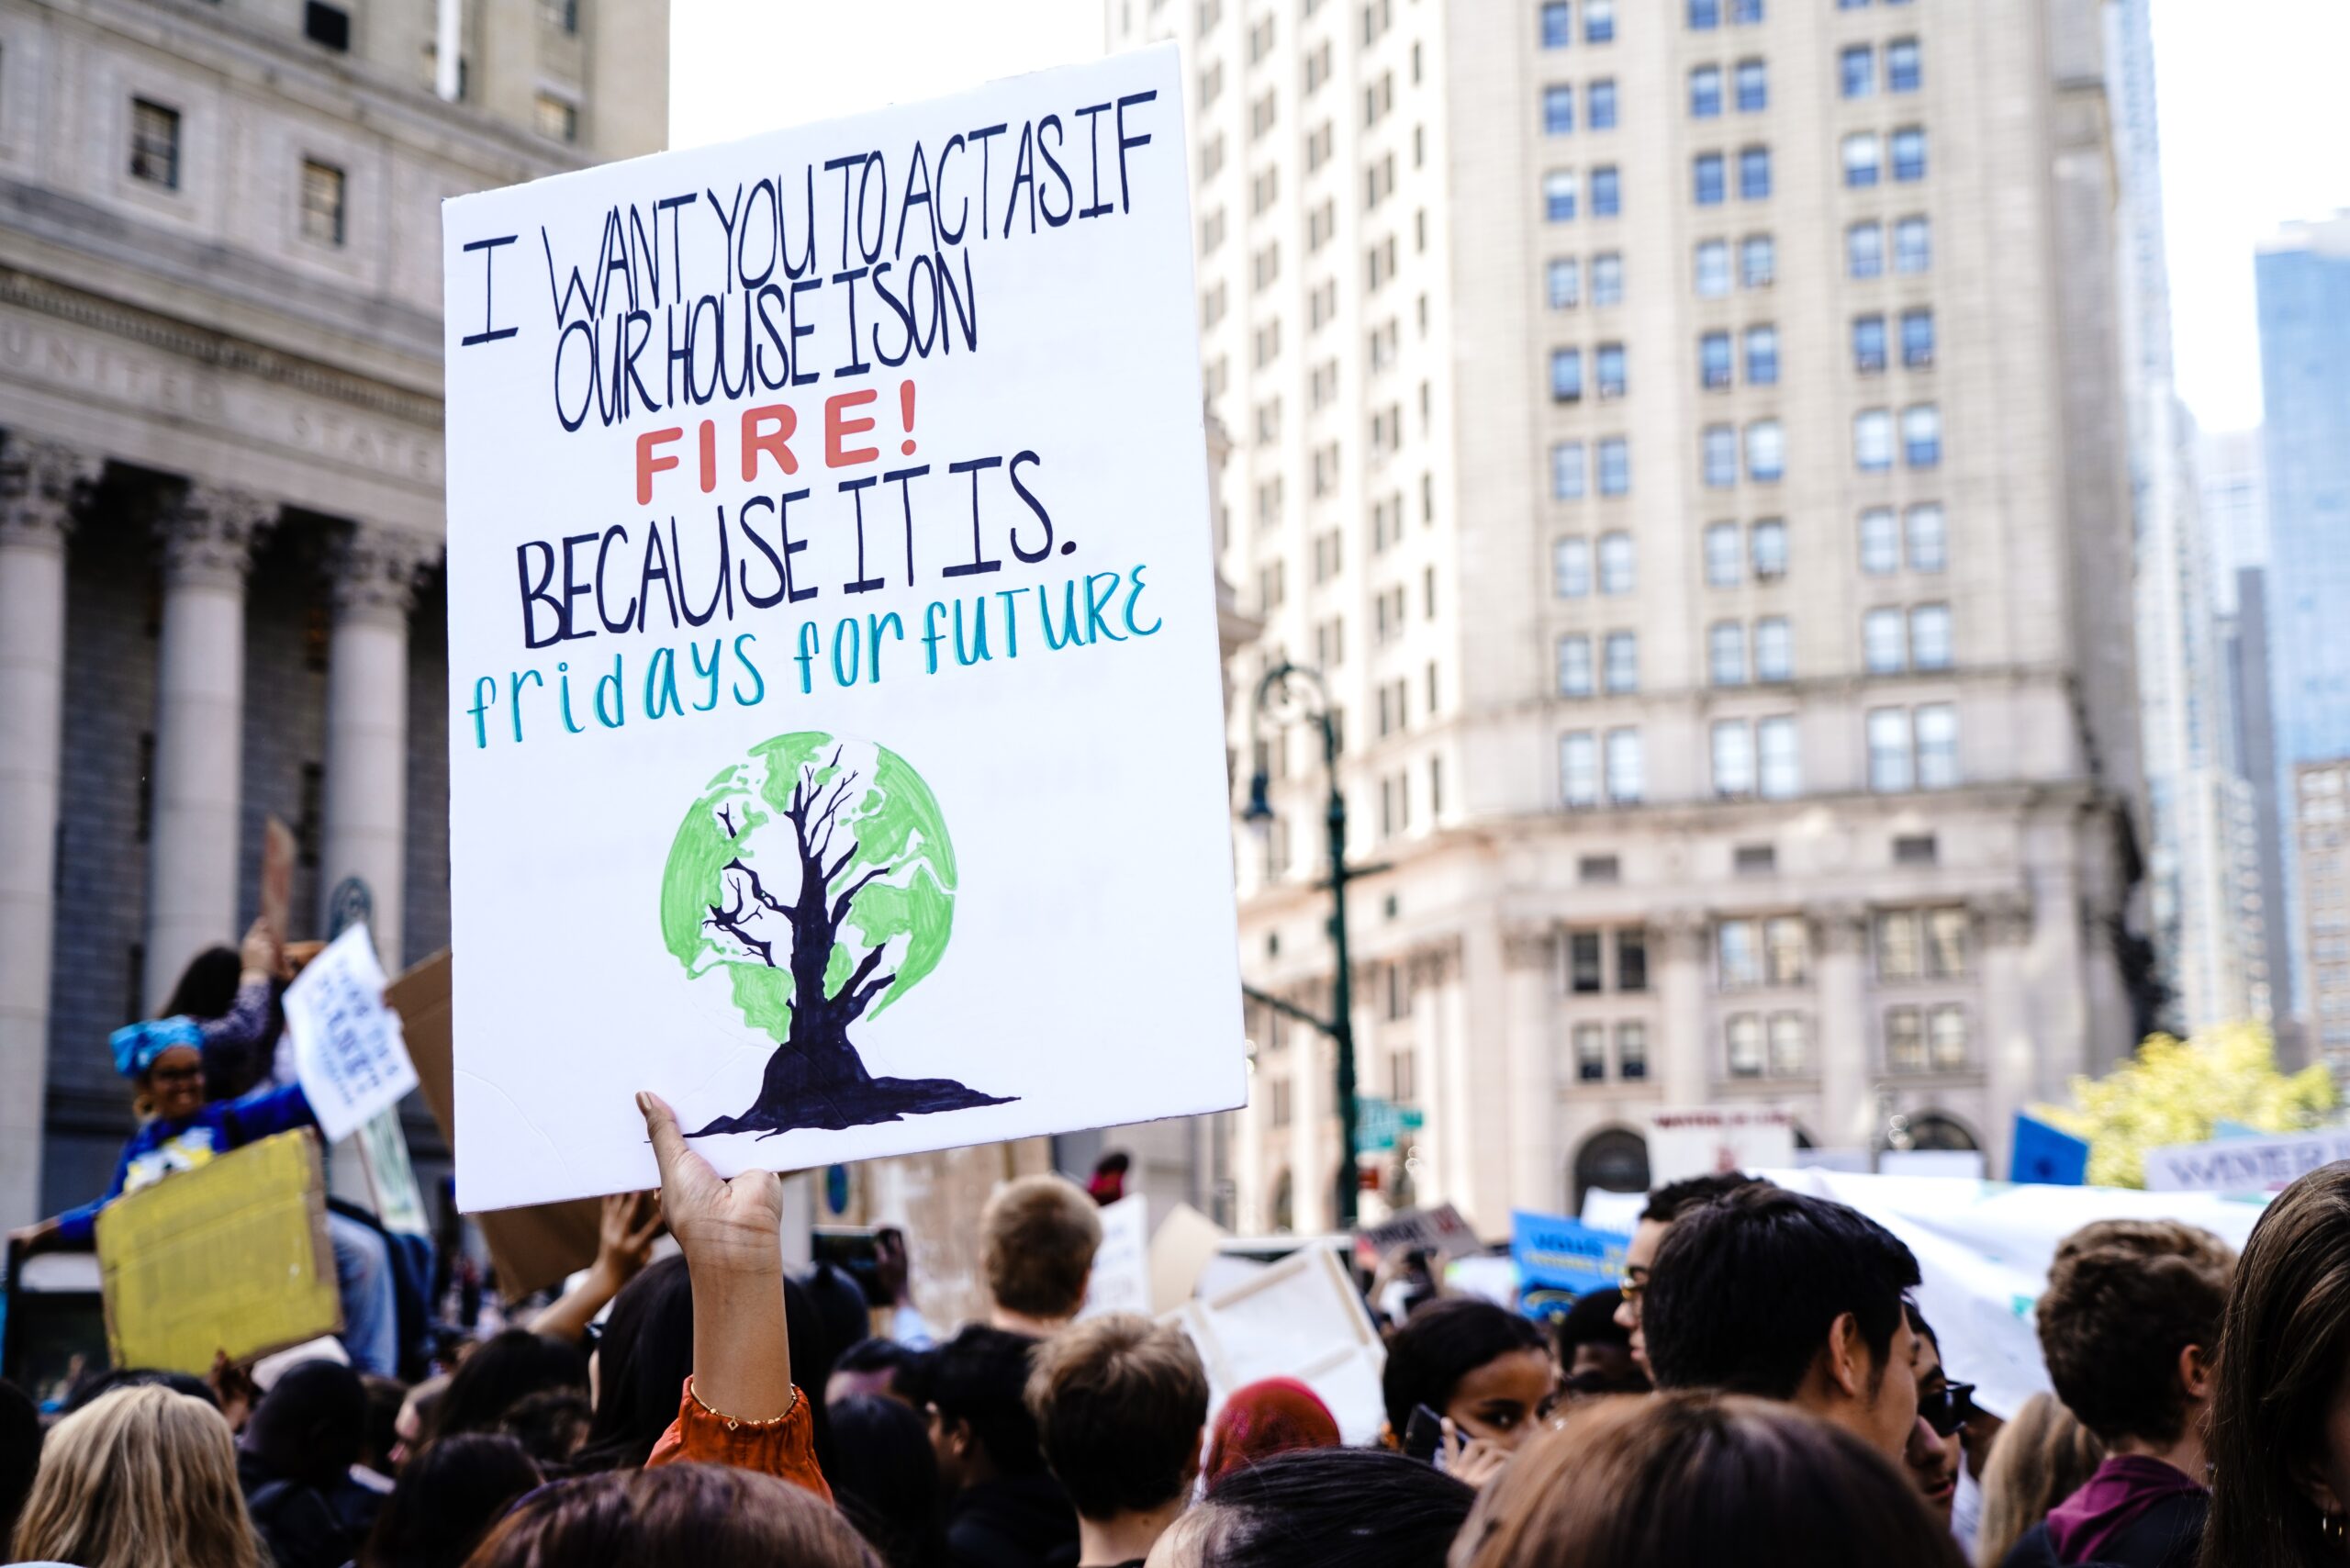 Is there monetary value for climate activism?